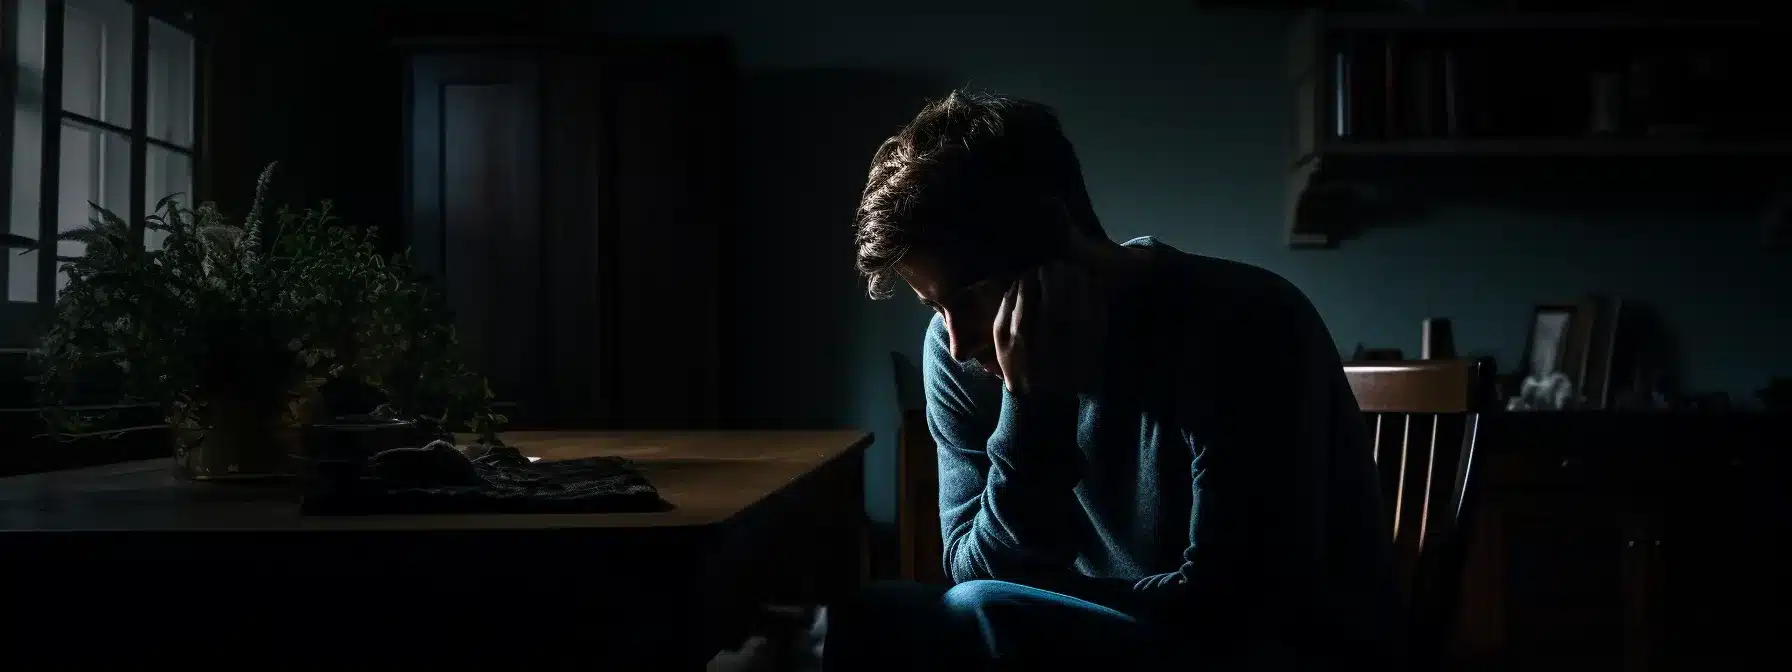 a person sitting alone in a dimly lit room, looking down with a somber expression on their face.